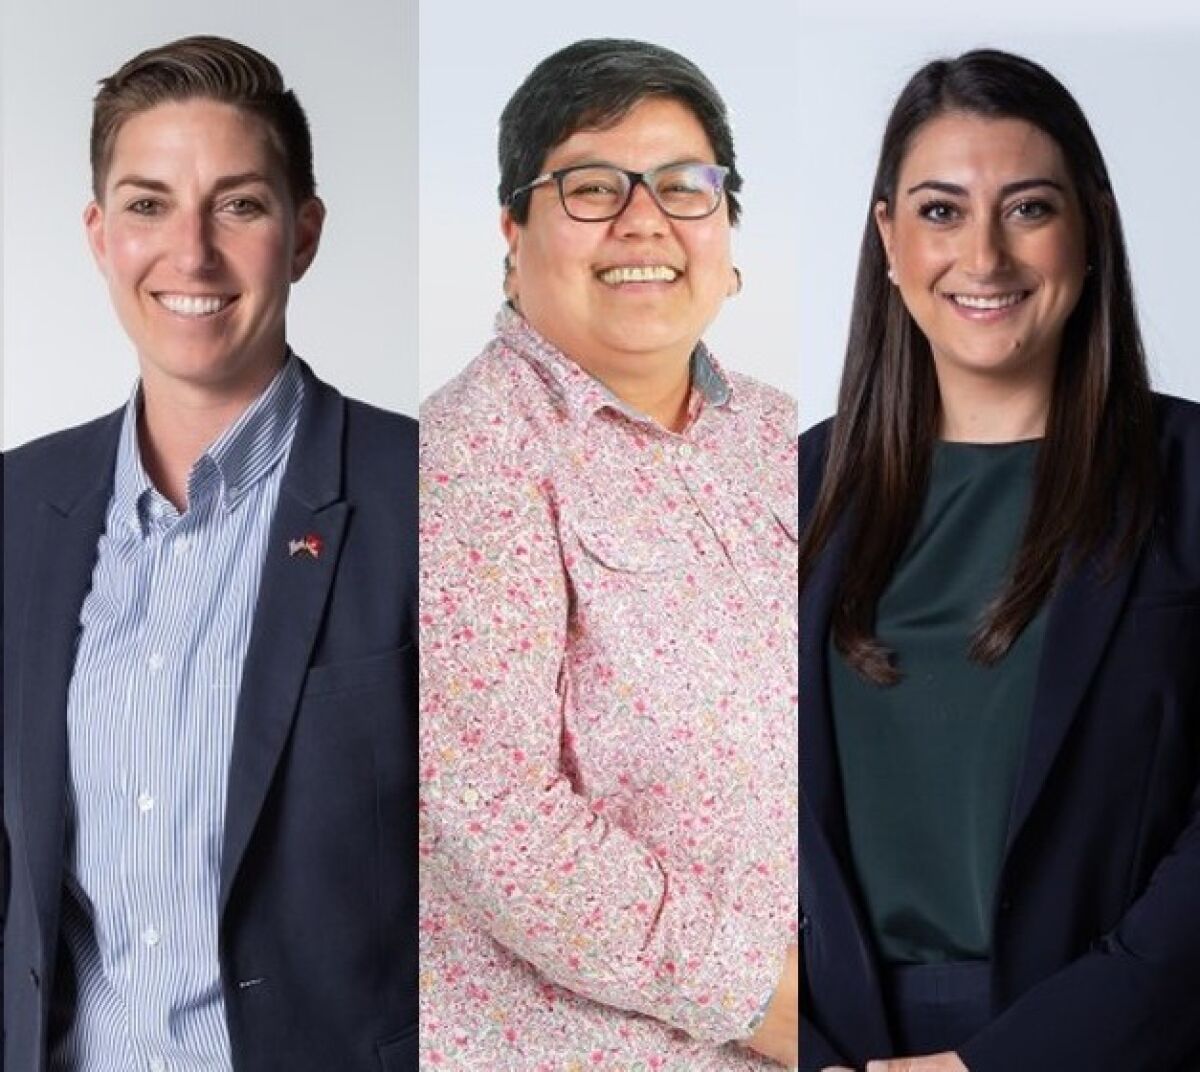 Candiates for the 53rd Congressional District, from left to right, Janessa Goldbeck, Georgette Gómez, Sara Jacobs, led the field in fourth quarter fundraising.